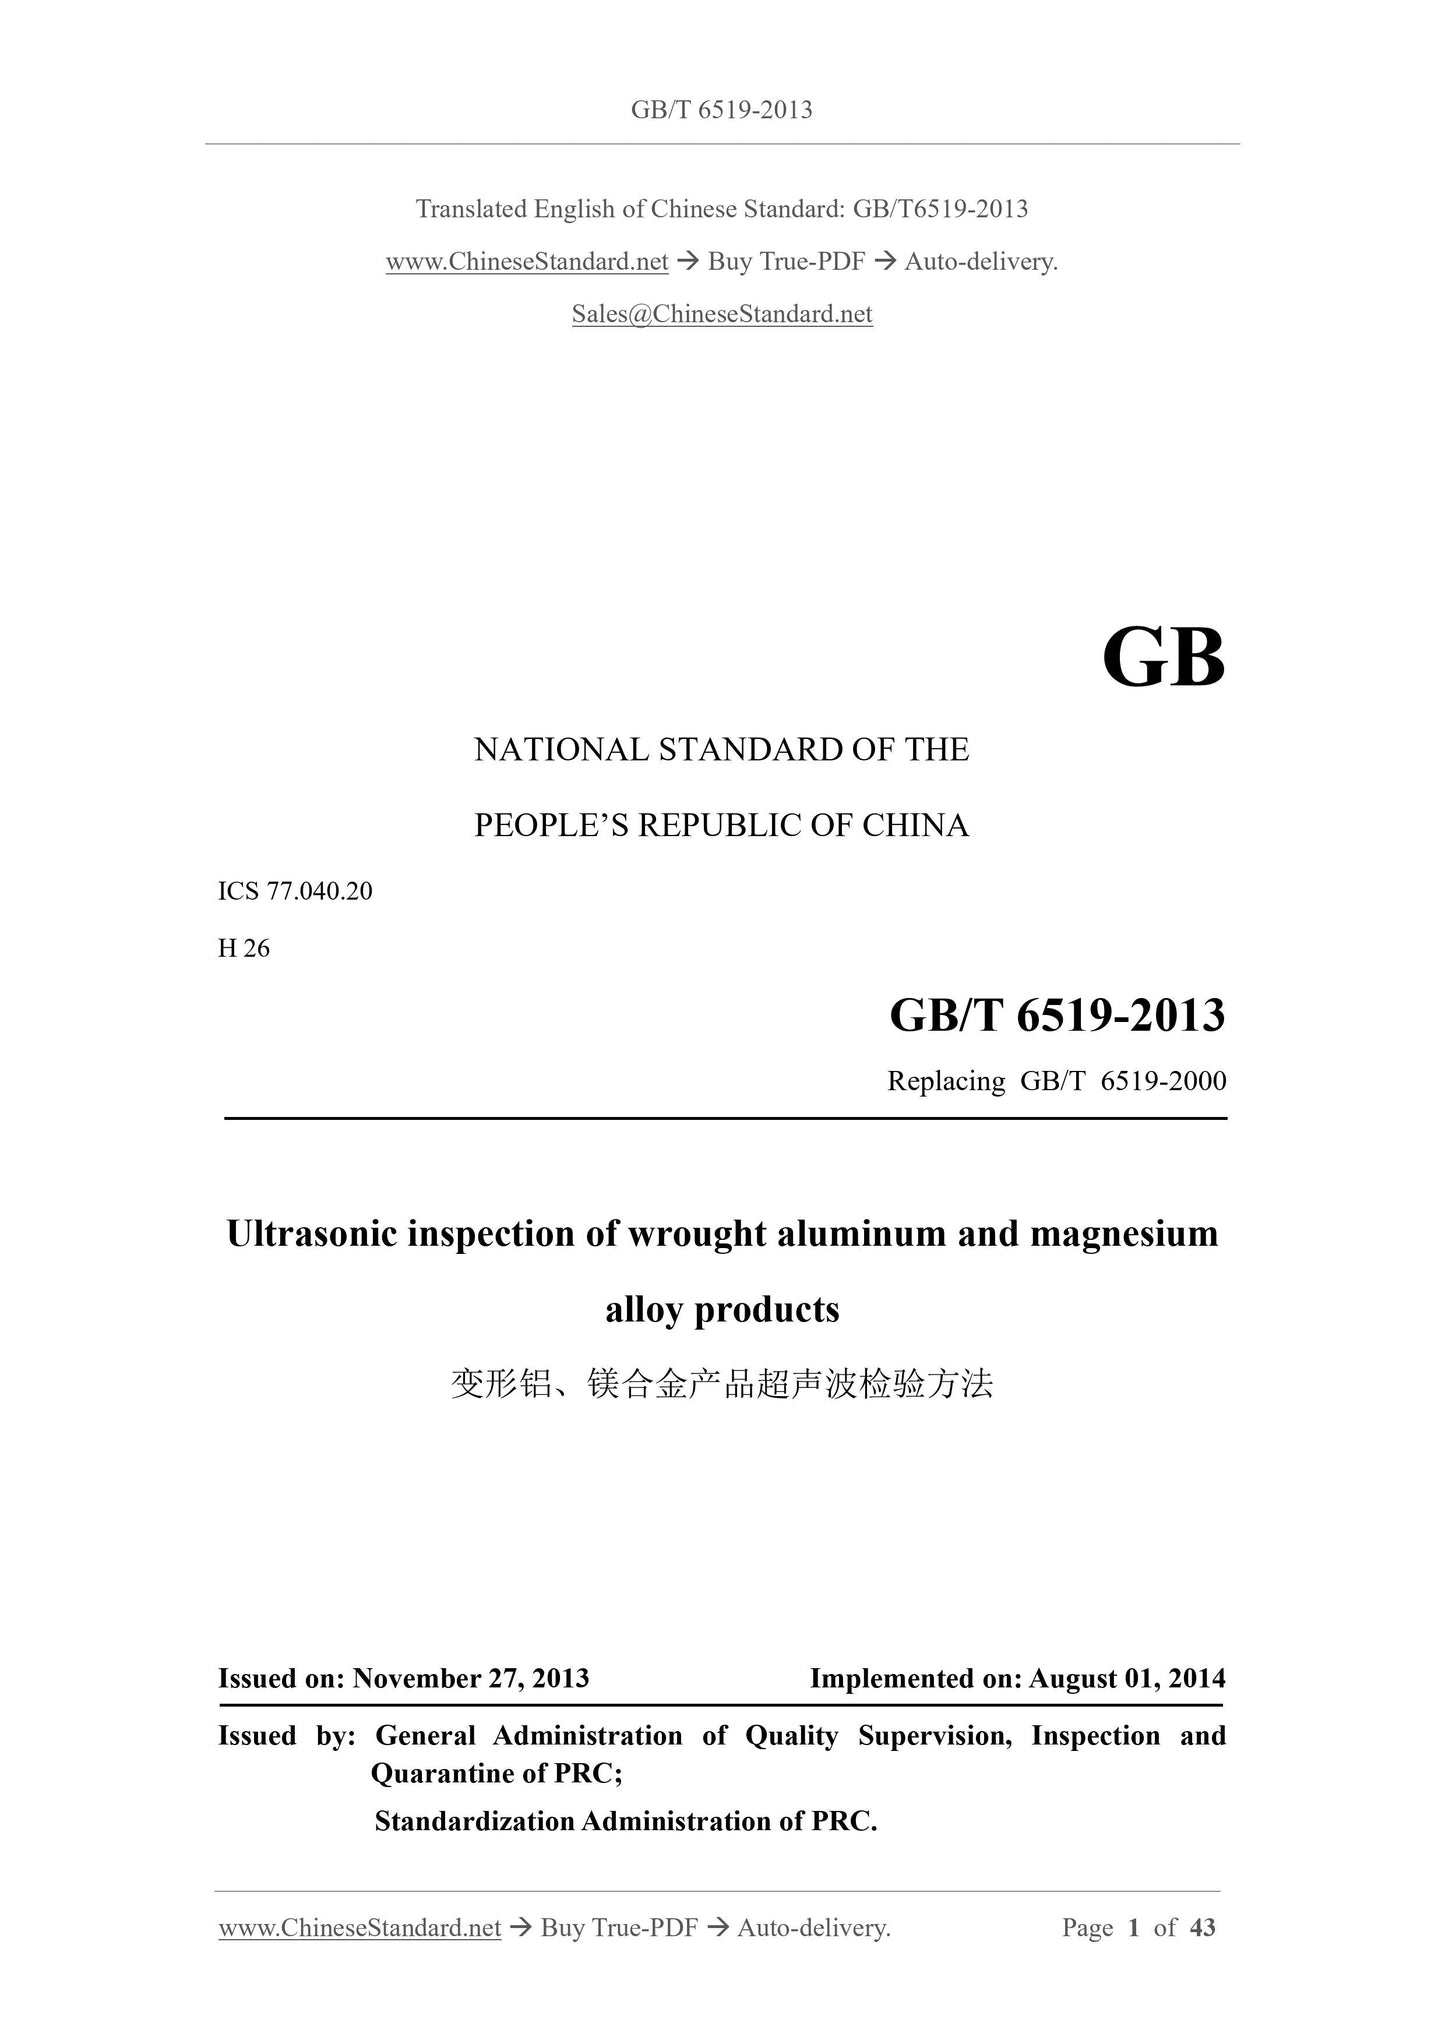 GB/T 6519-2013 Page 1